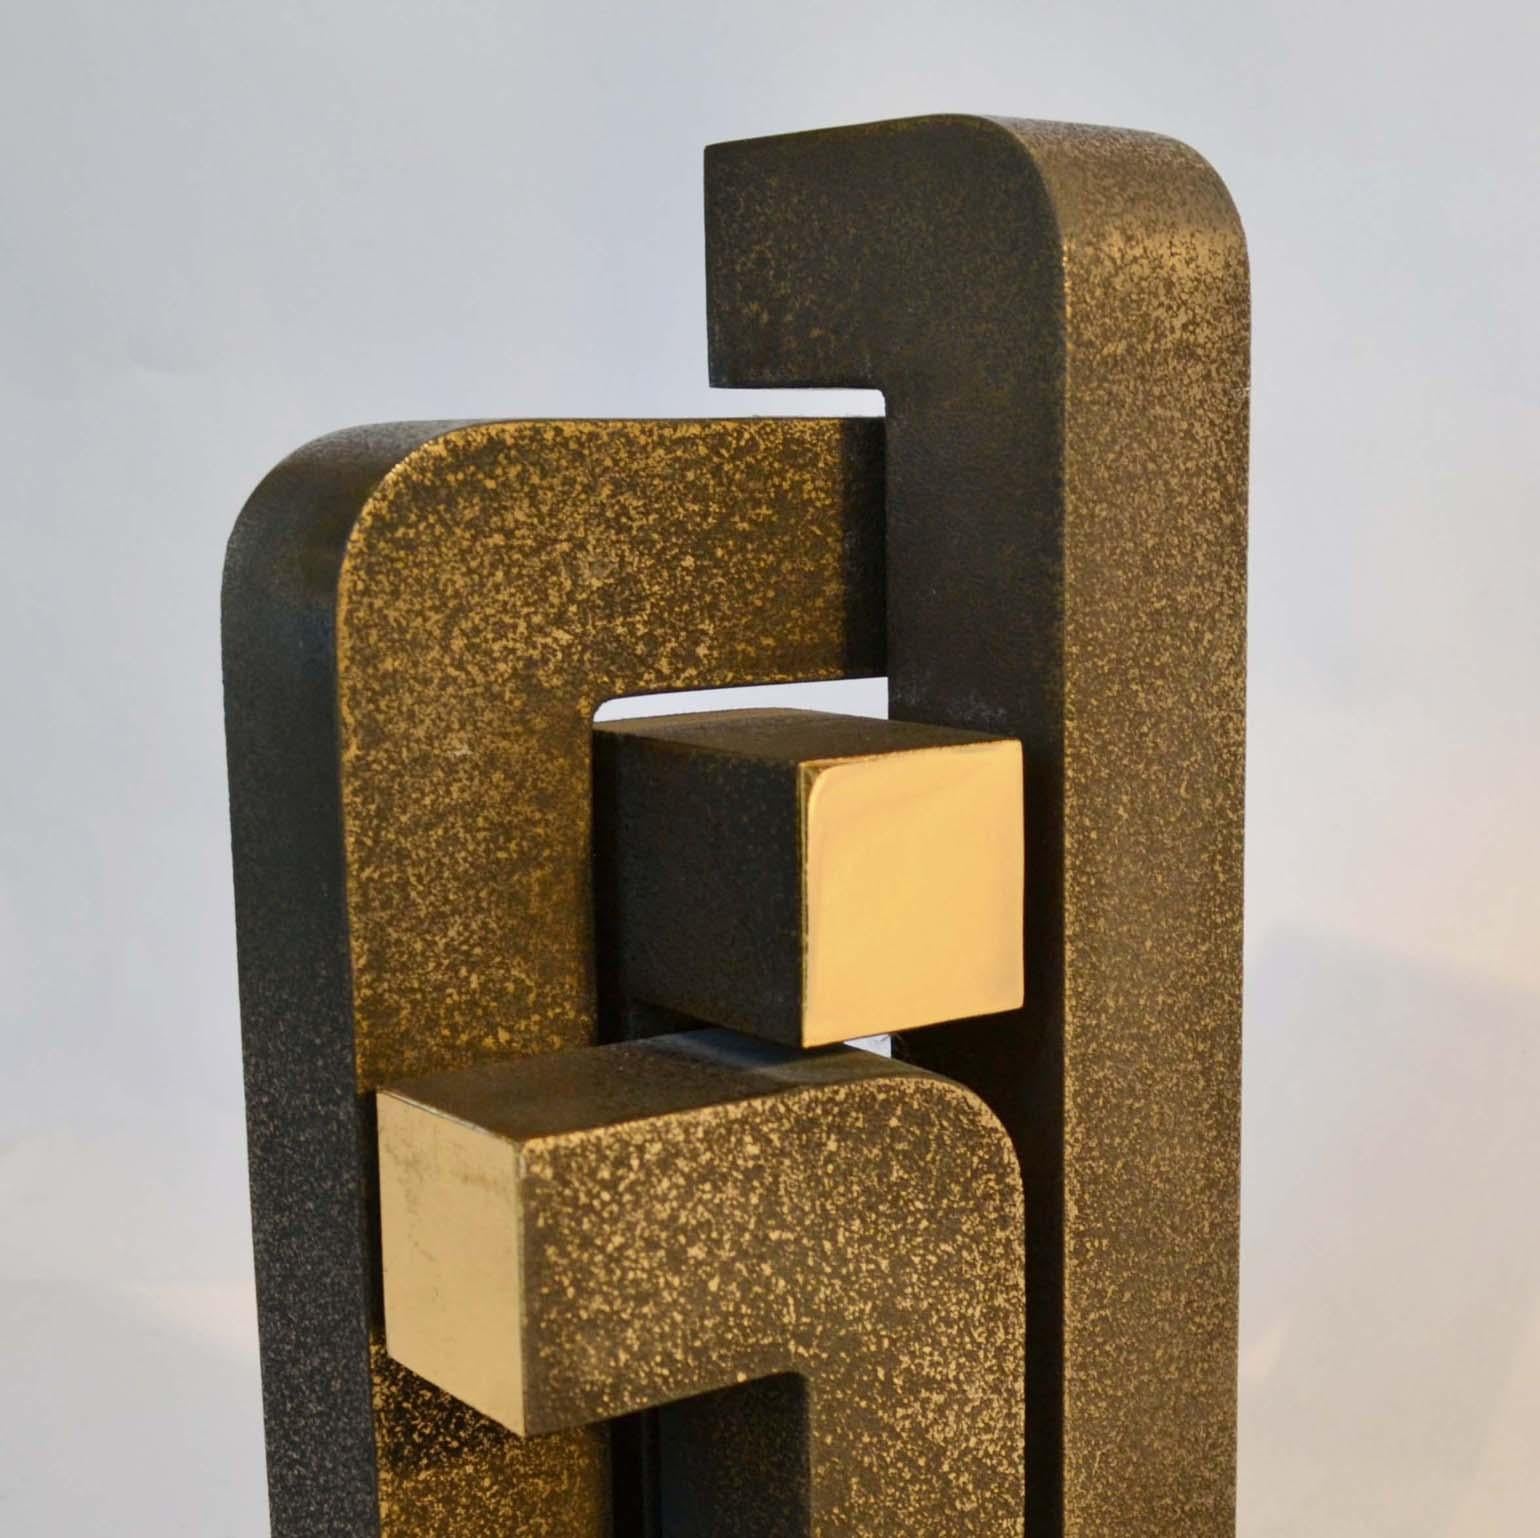 Late 20th Century Abstract Geometric Minimalist Bronze Sculpture by Zonena 1979 in Limited Edition